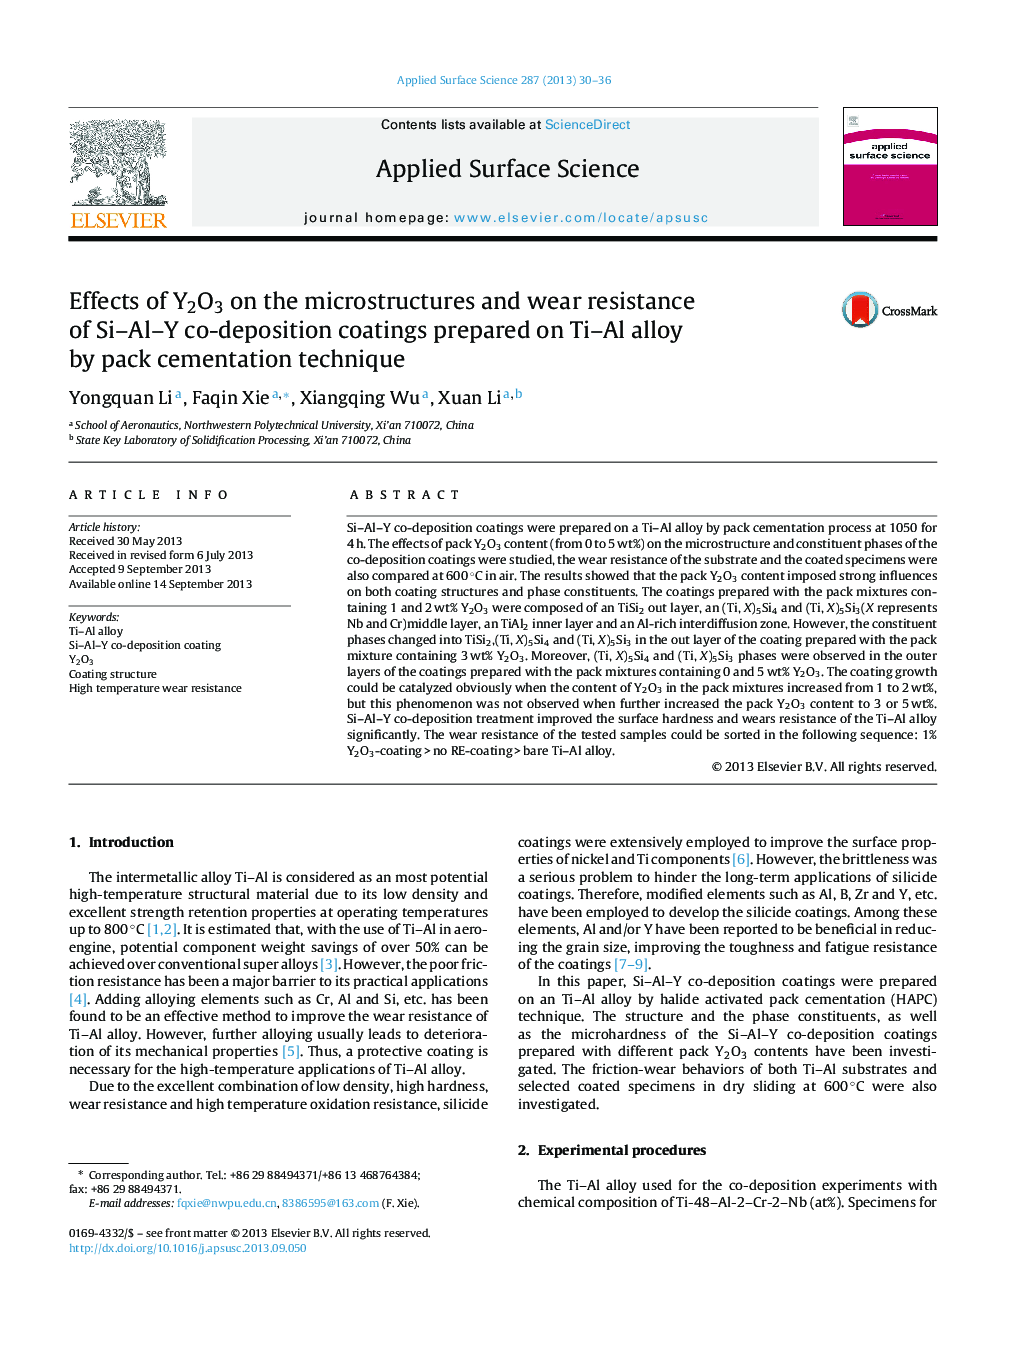 Effects of Y2O3 on the microstructures and wear resistance of Si-Al-Y co-deposition coatings prepared on Ti-Al alloy by pack cementation technique